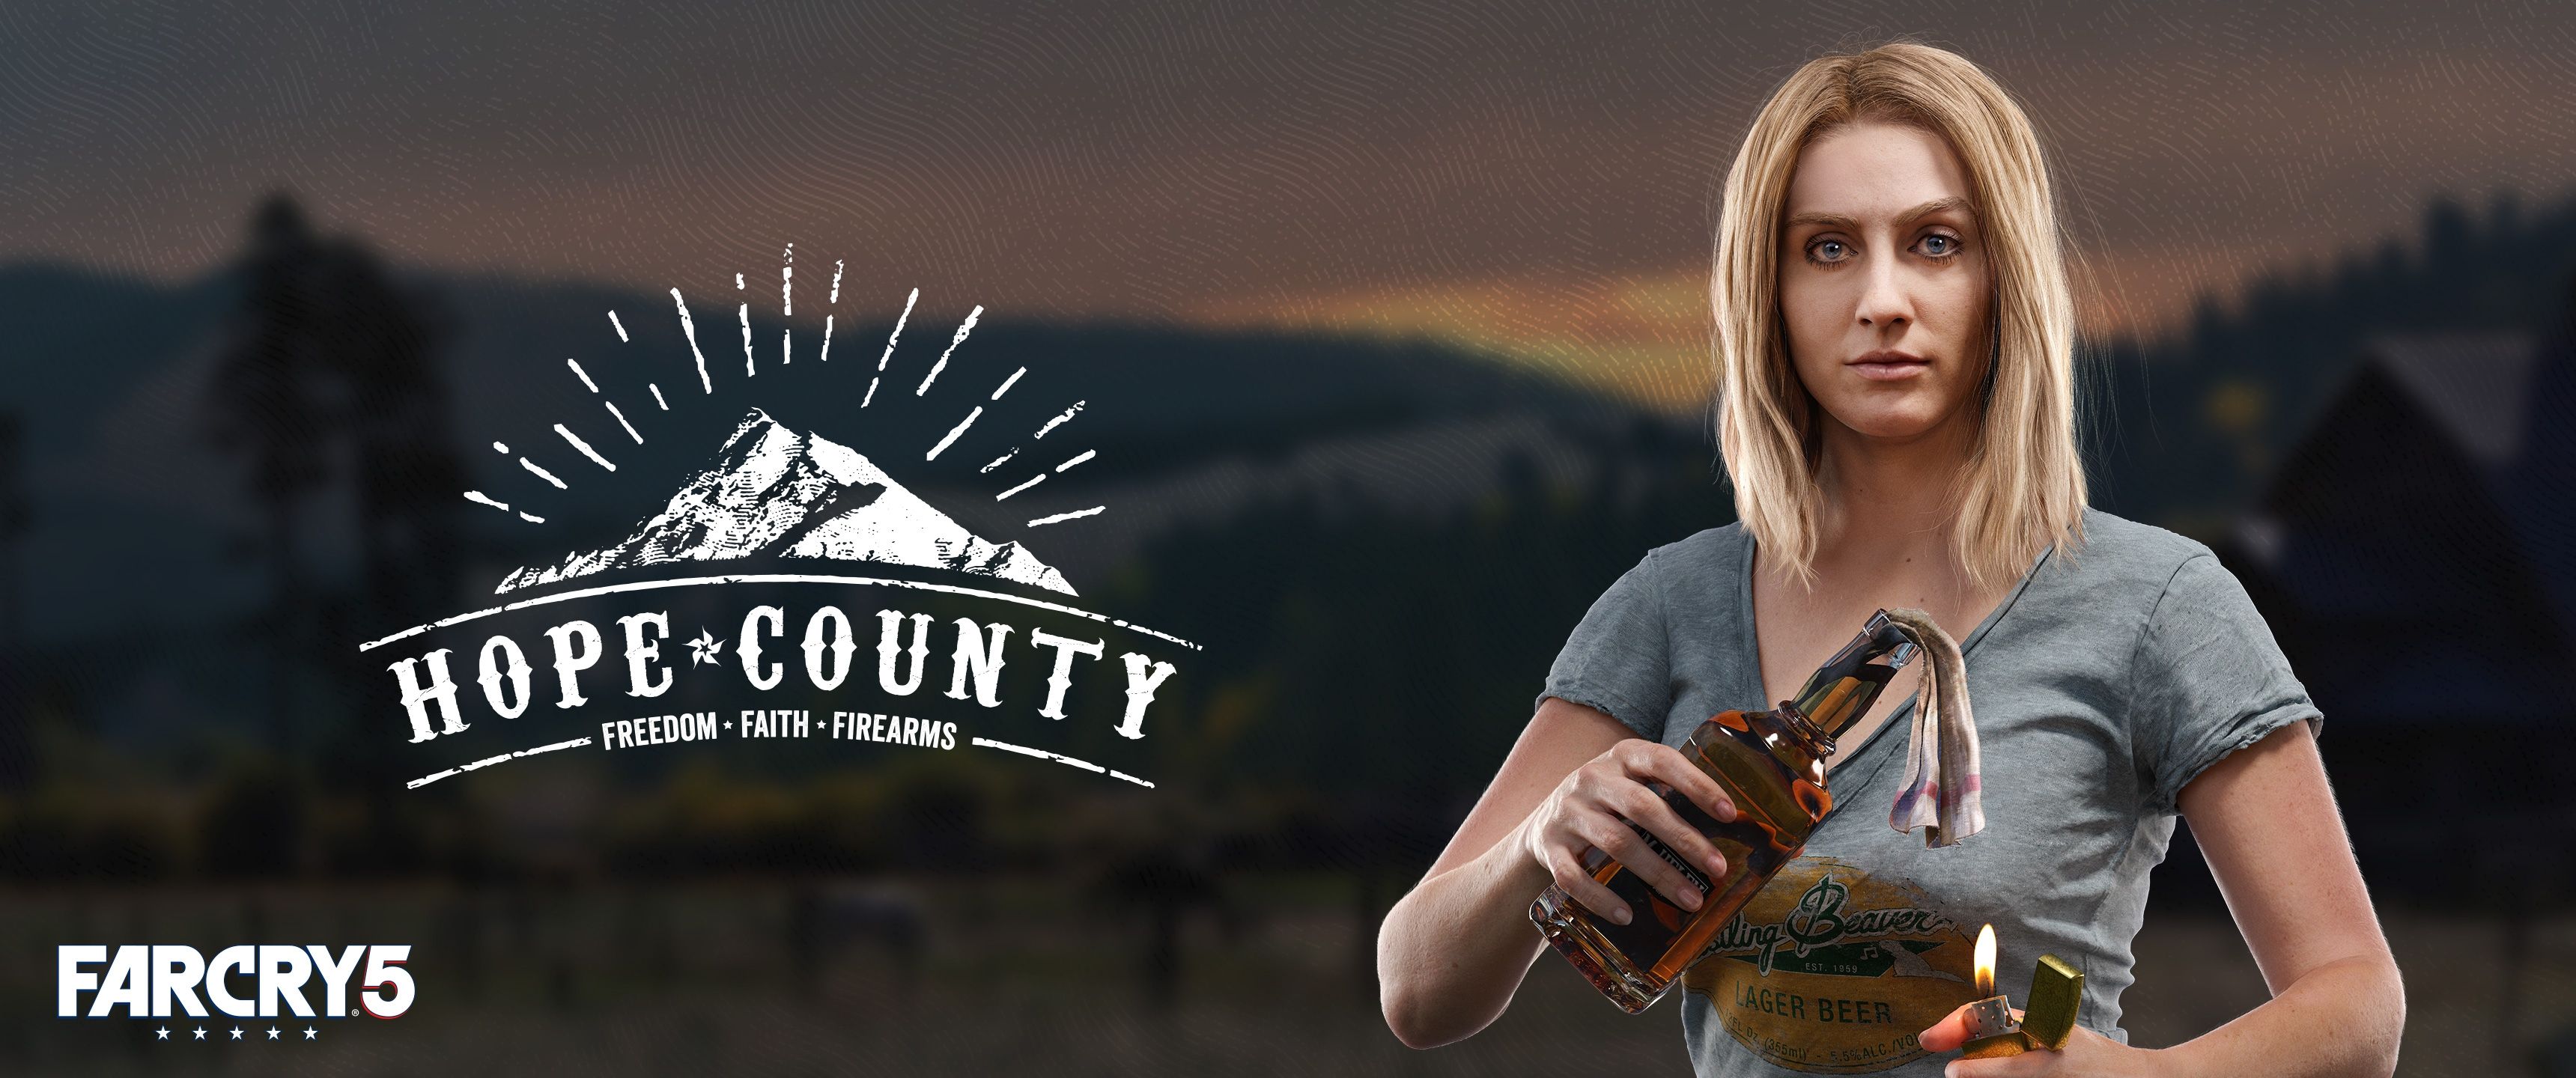 Download 3440x1440 Far Cry Hope County, Woman Wallpaper